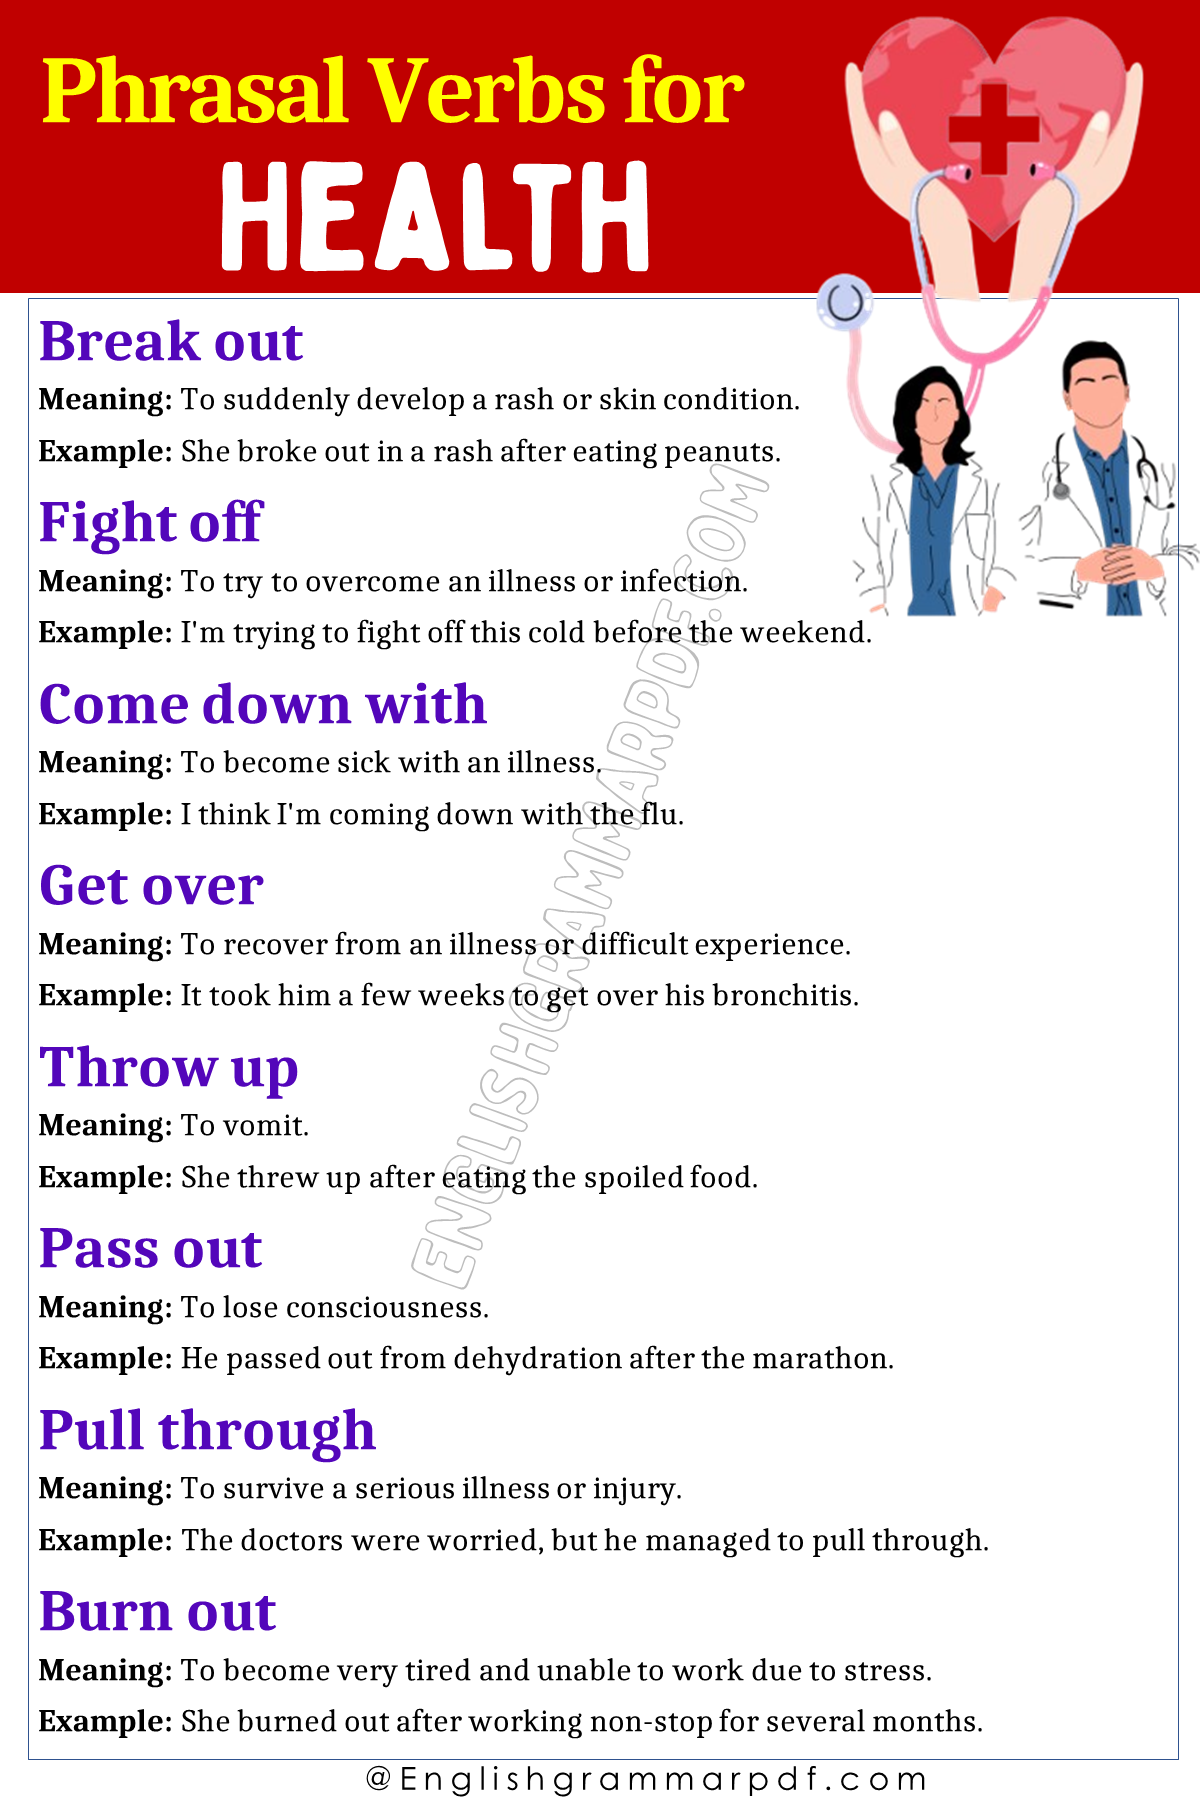 Phrasal Verbs Related To Health